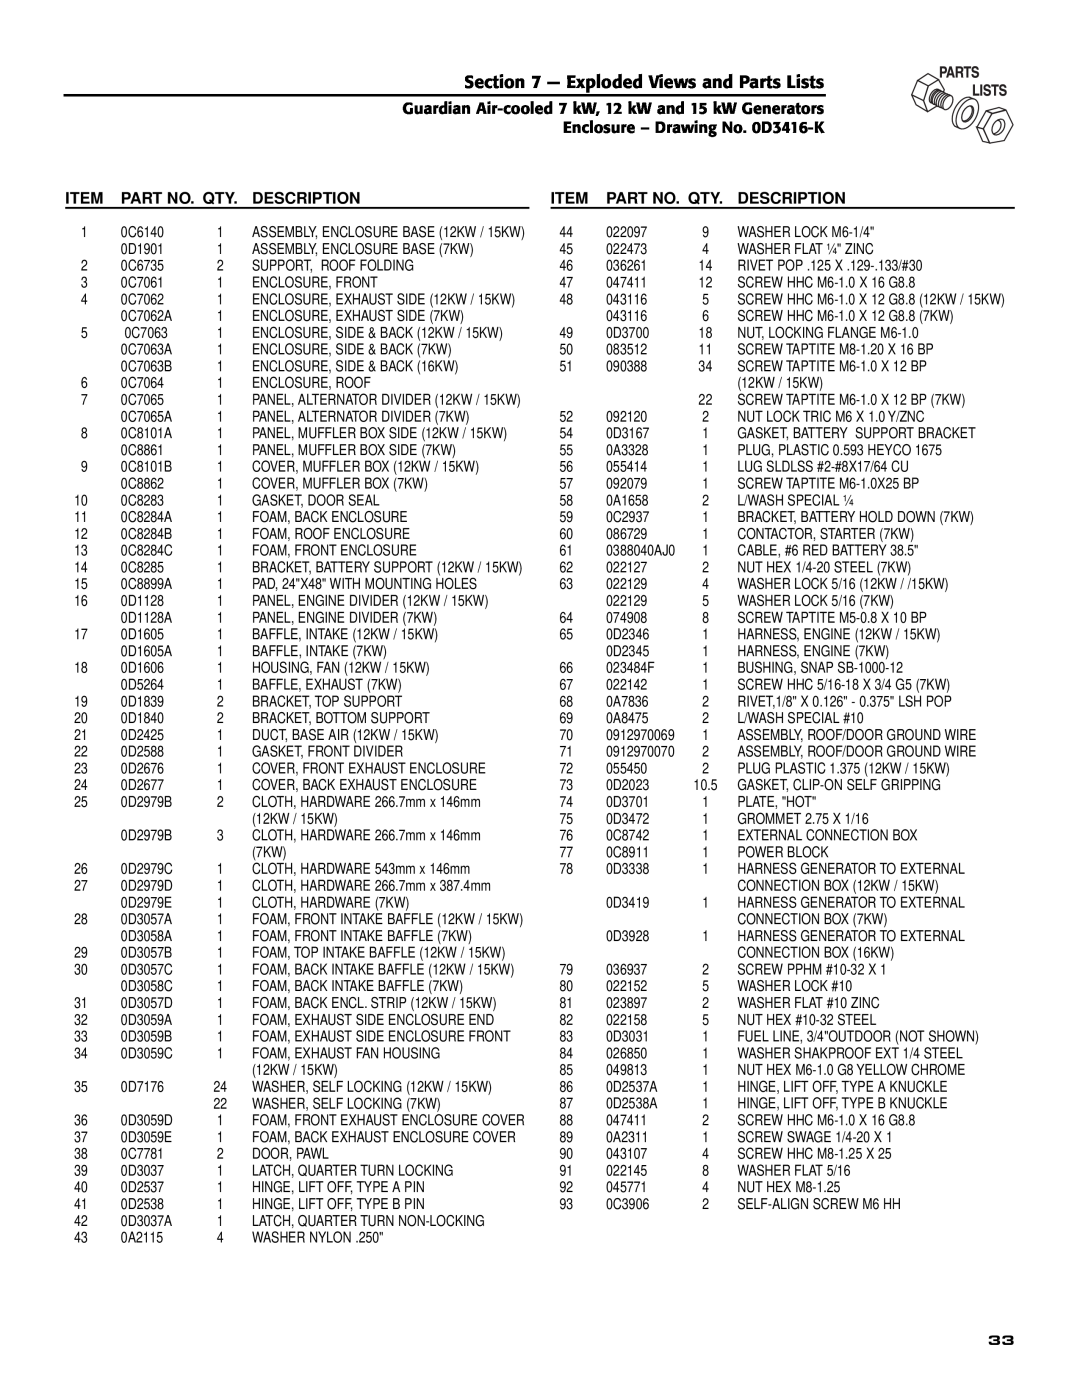 Generac Power Systems 04760-0, 04758-0, 04759-0 owner manual Exploded Views and Parts Lists, Part No. Qty, Description 